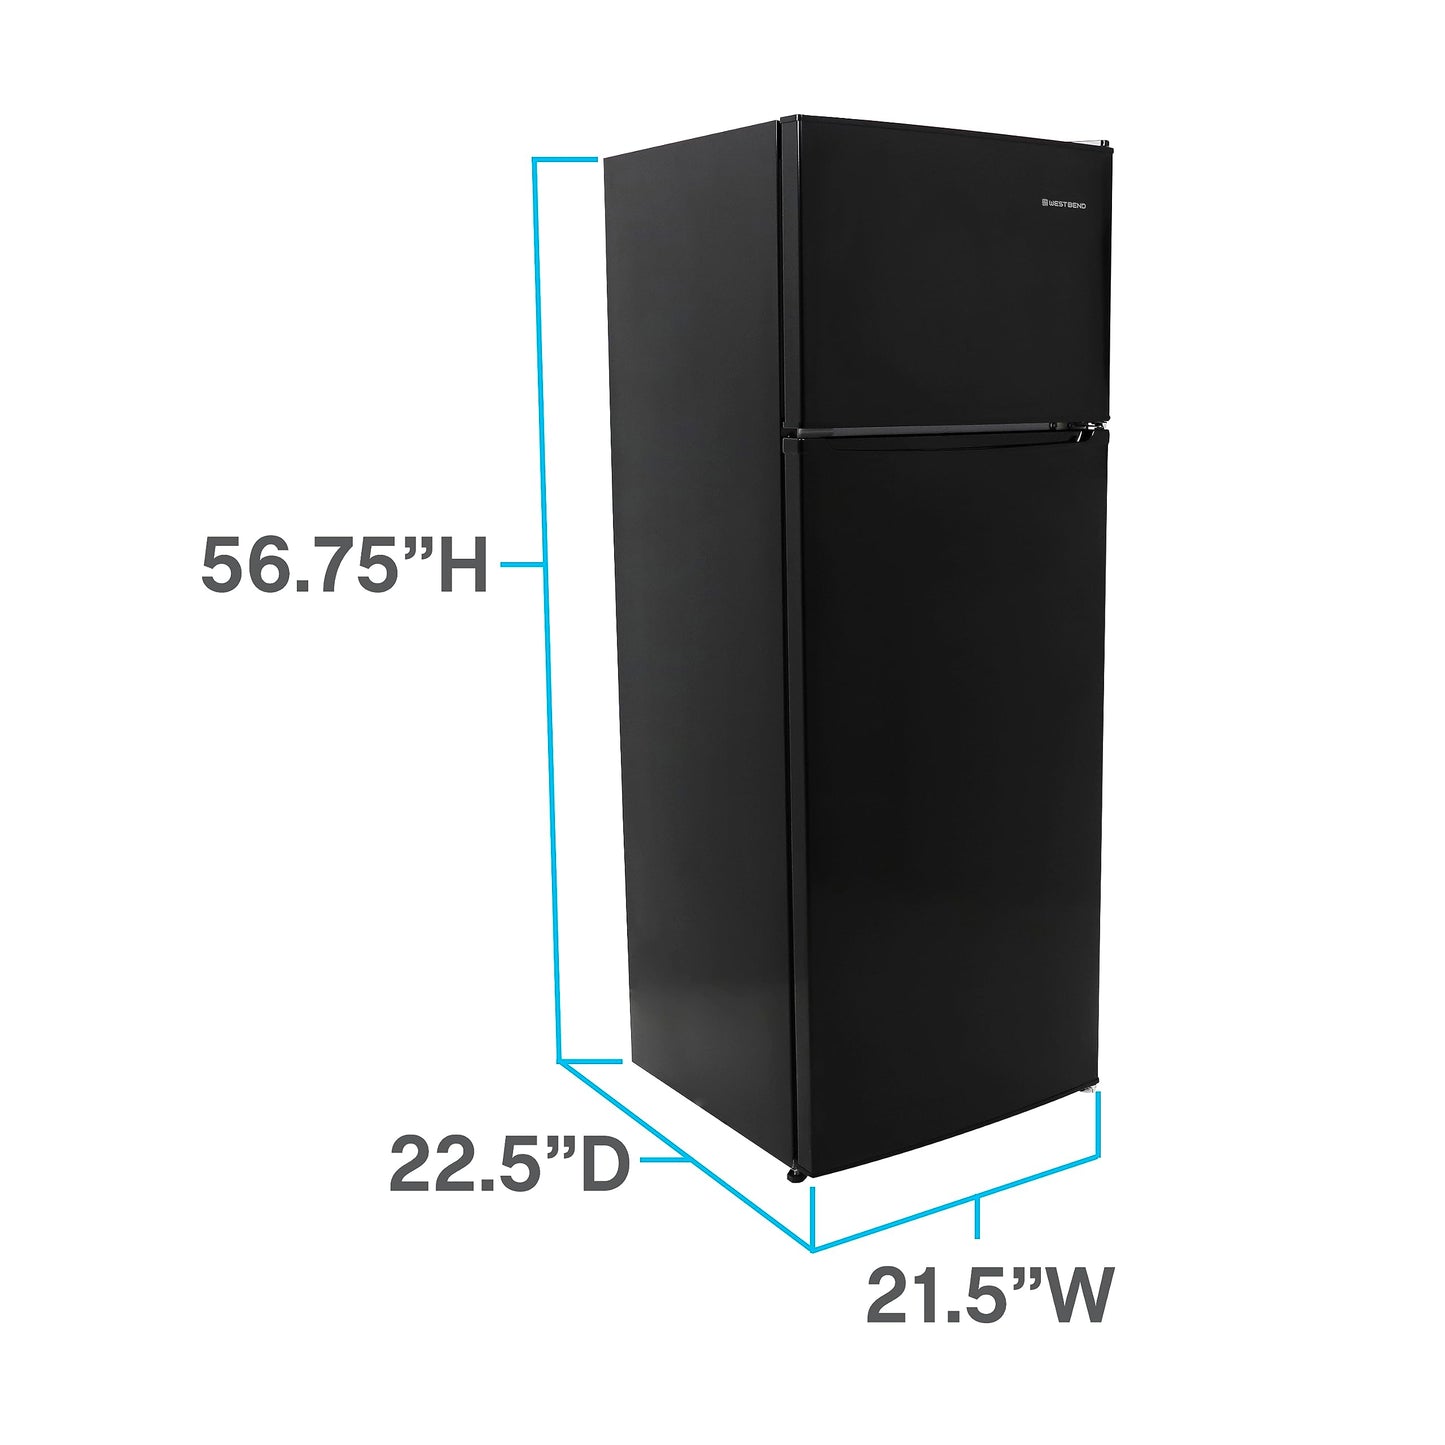 West Bend Apartment Refrigerator Freestanding Slim Design Full Fridge with Top Freezer for Condo, House, Small Kitchen Use, 7.4-Cu.Ft, Black